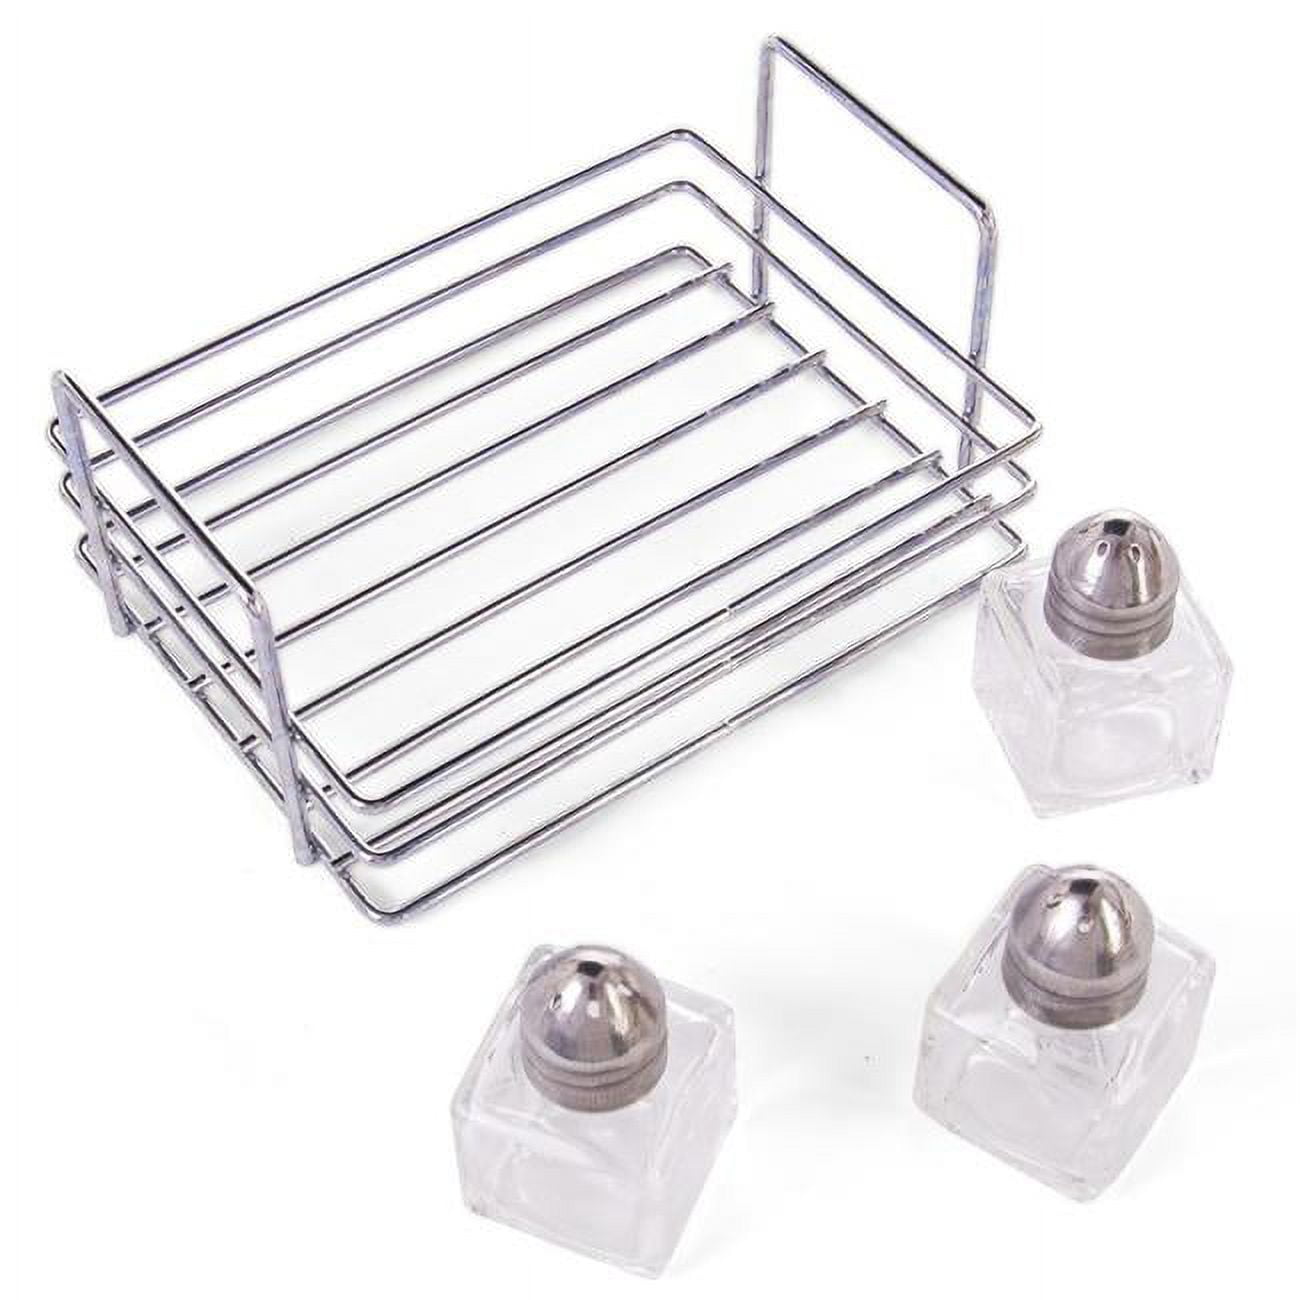 Picture of Brybelly KTBL-003 Mini Salt & Pepper Shakers Rack